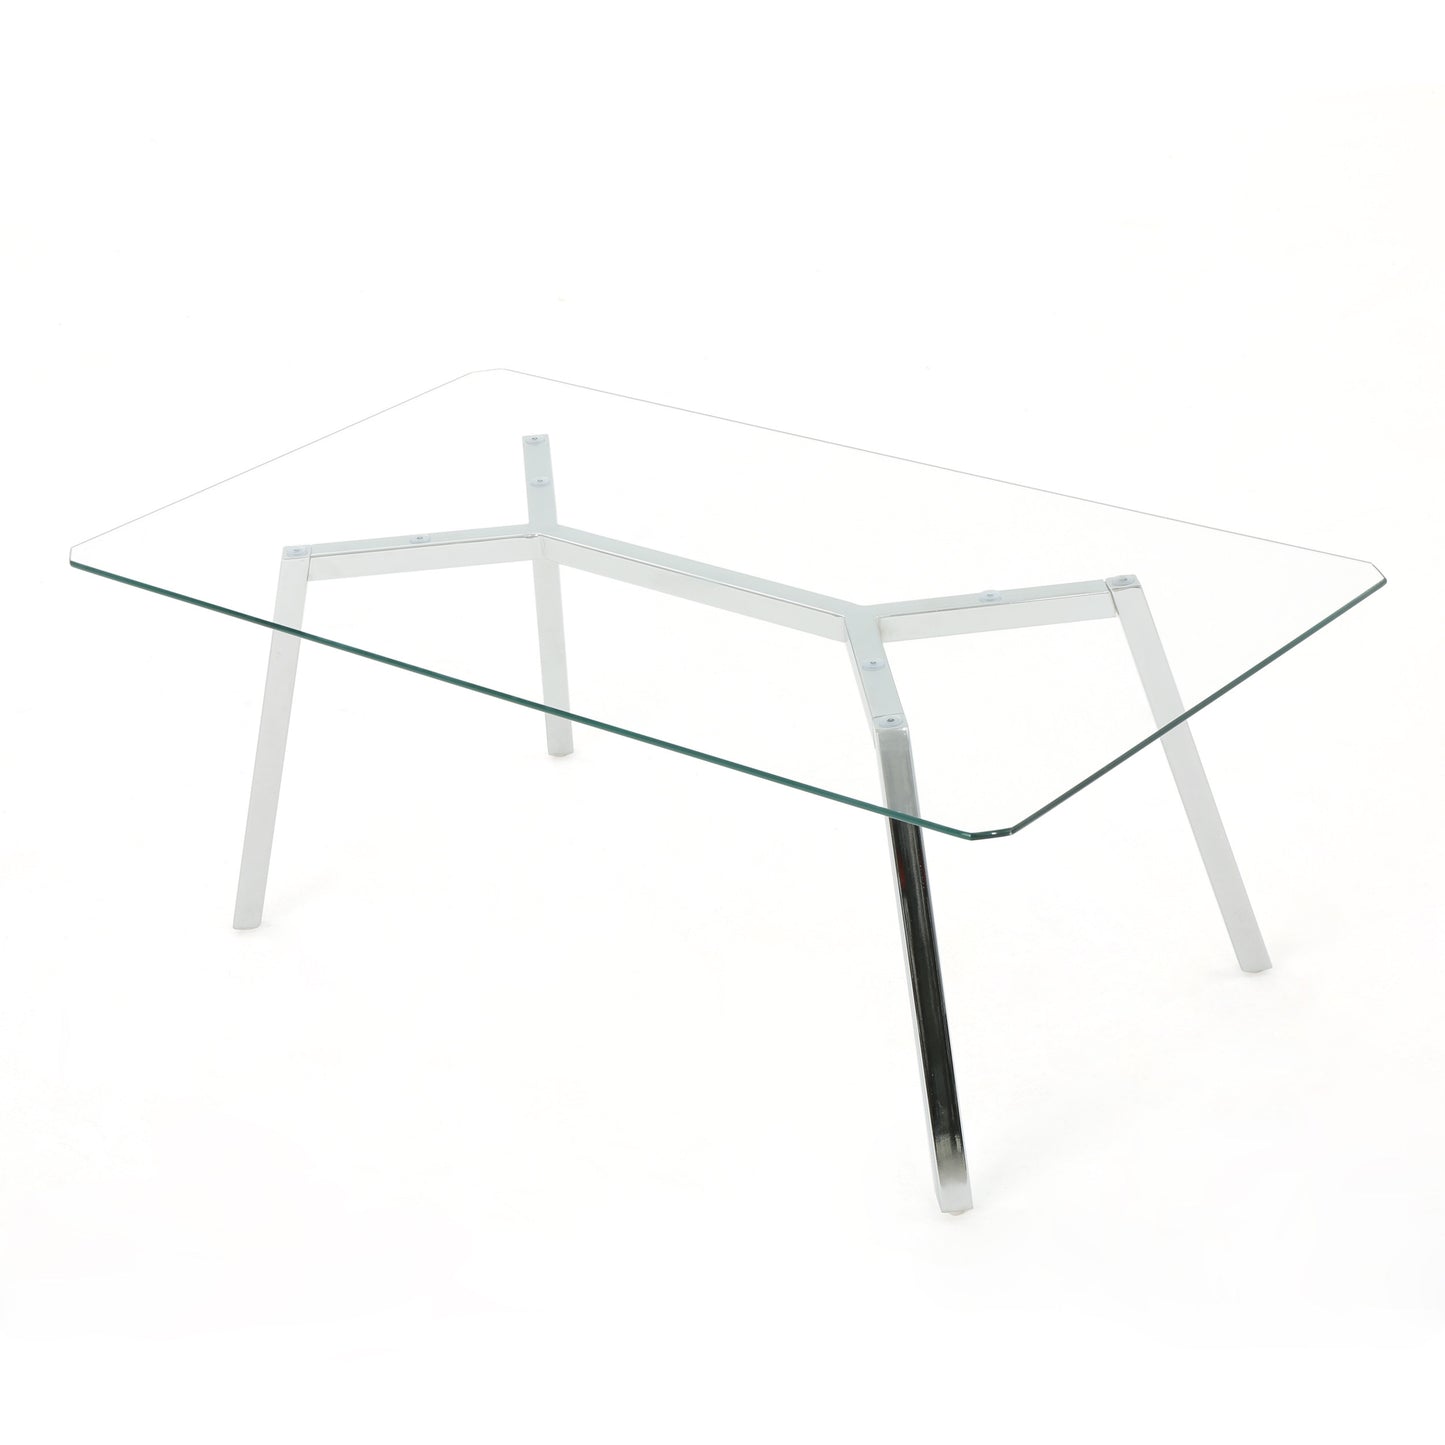 Arbutus Modern Glam Glass Top Dining Table, Clear and Chrome